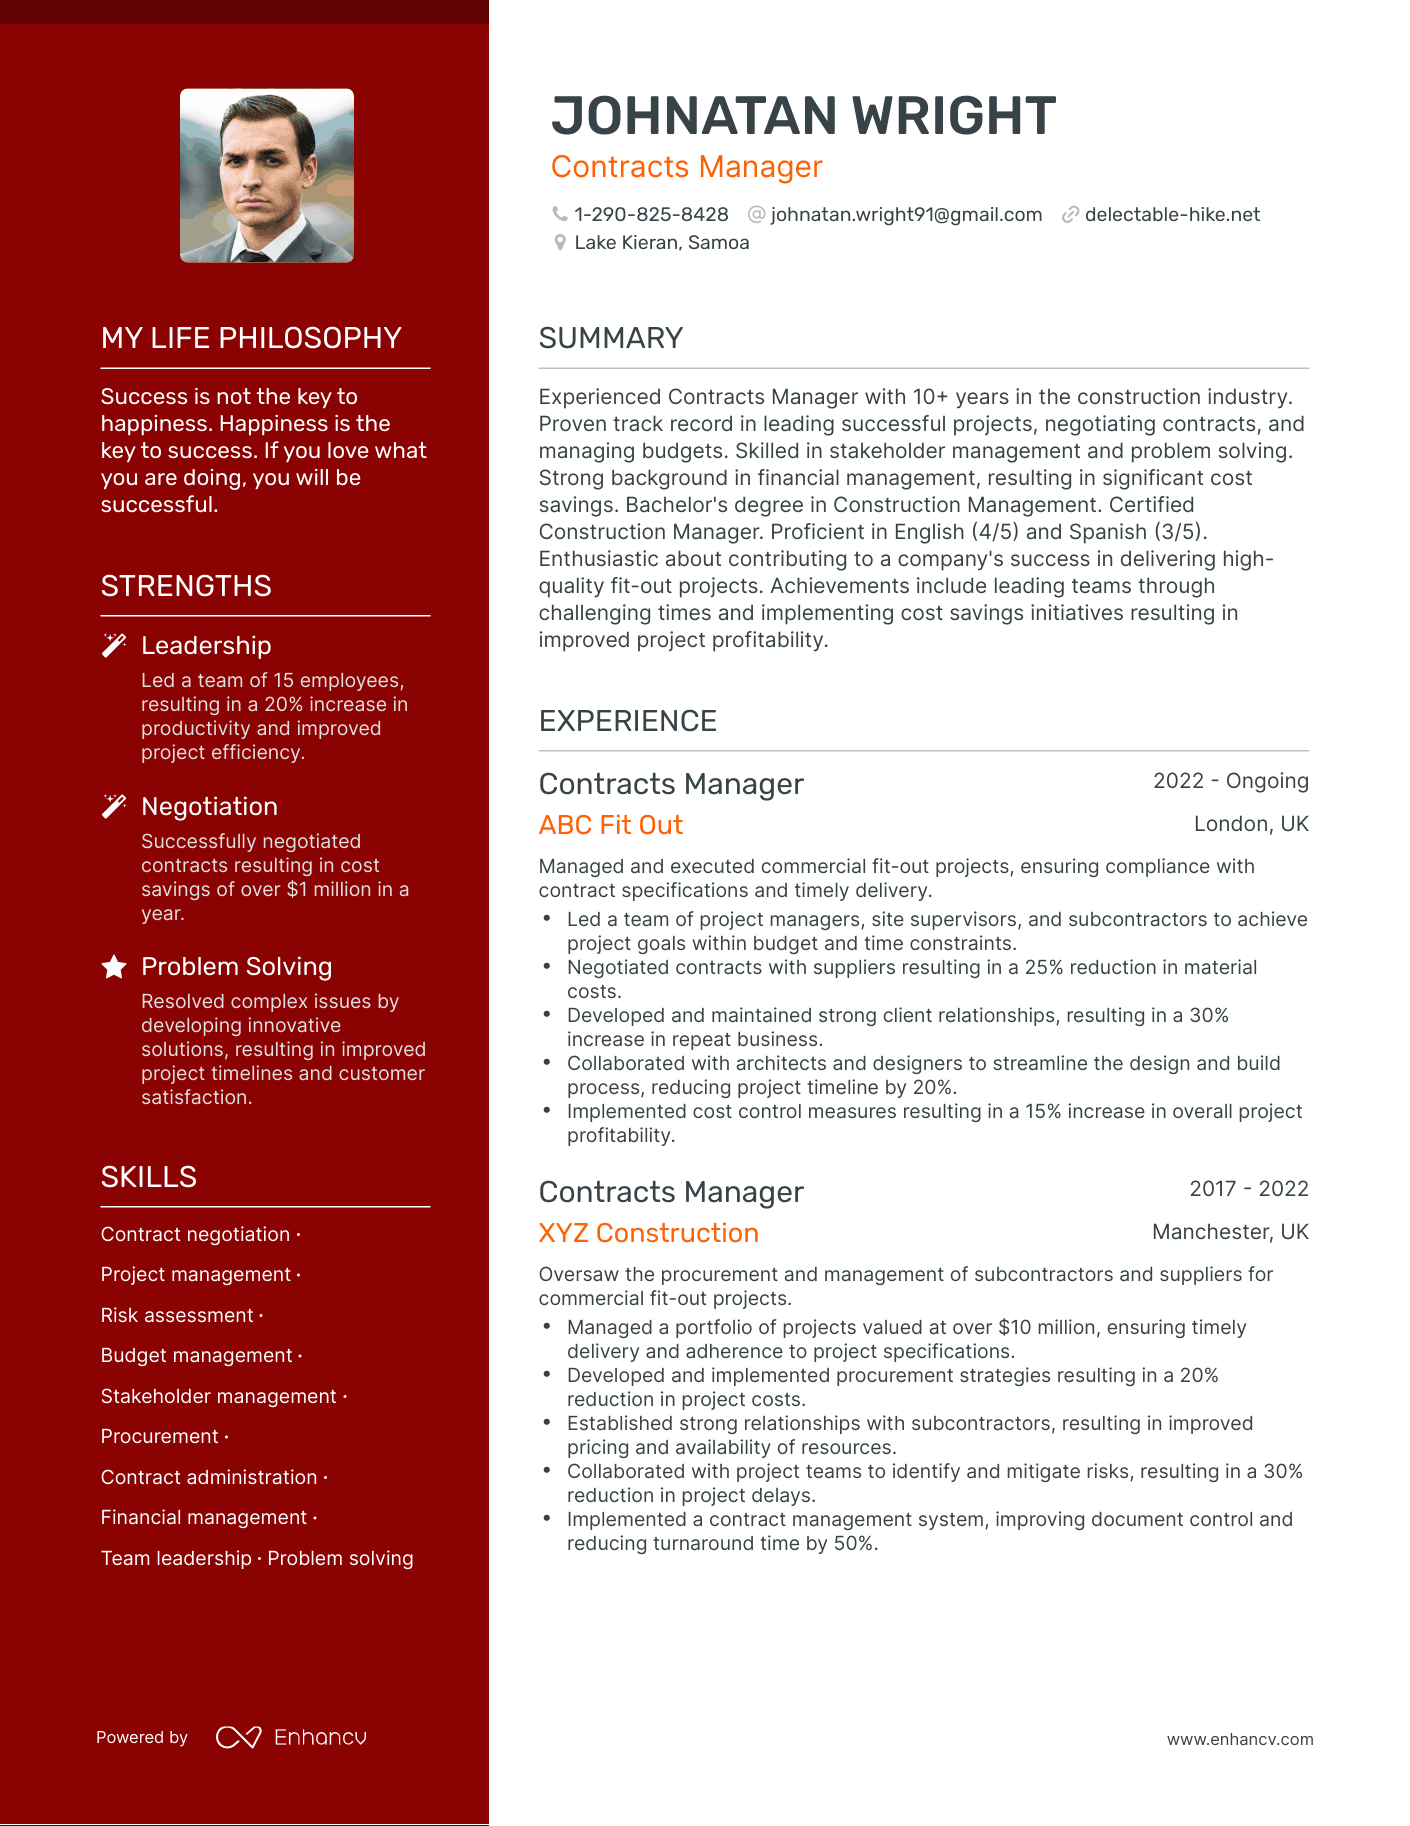 Contracts Manager resume example